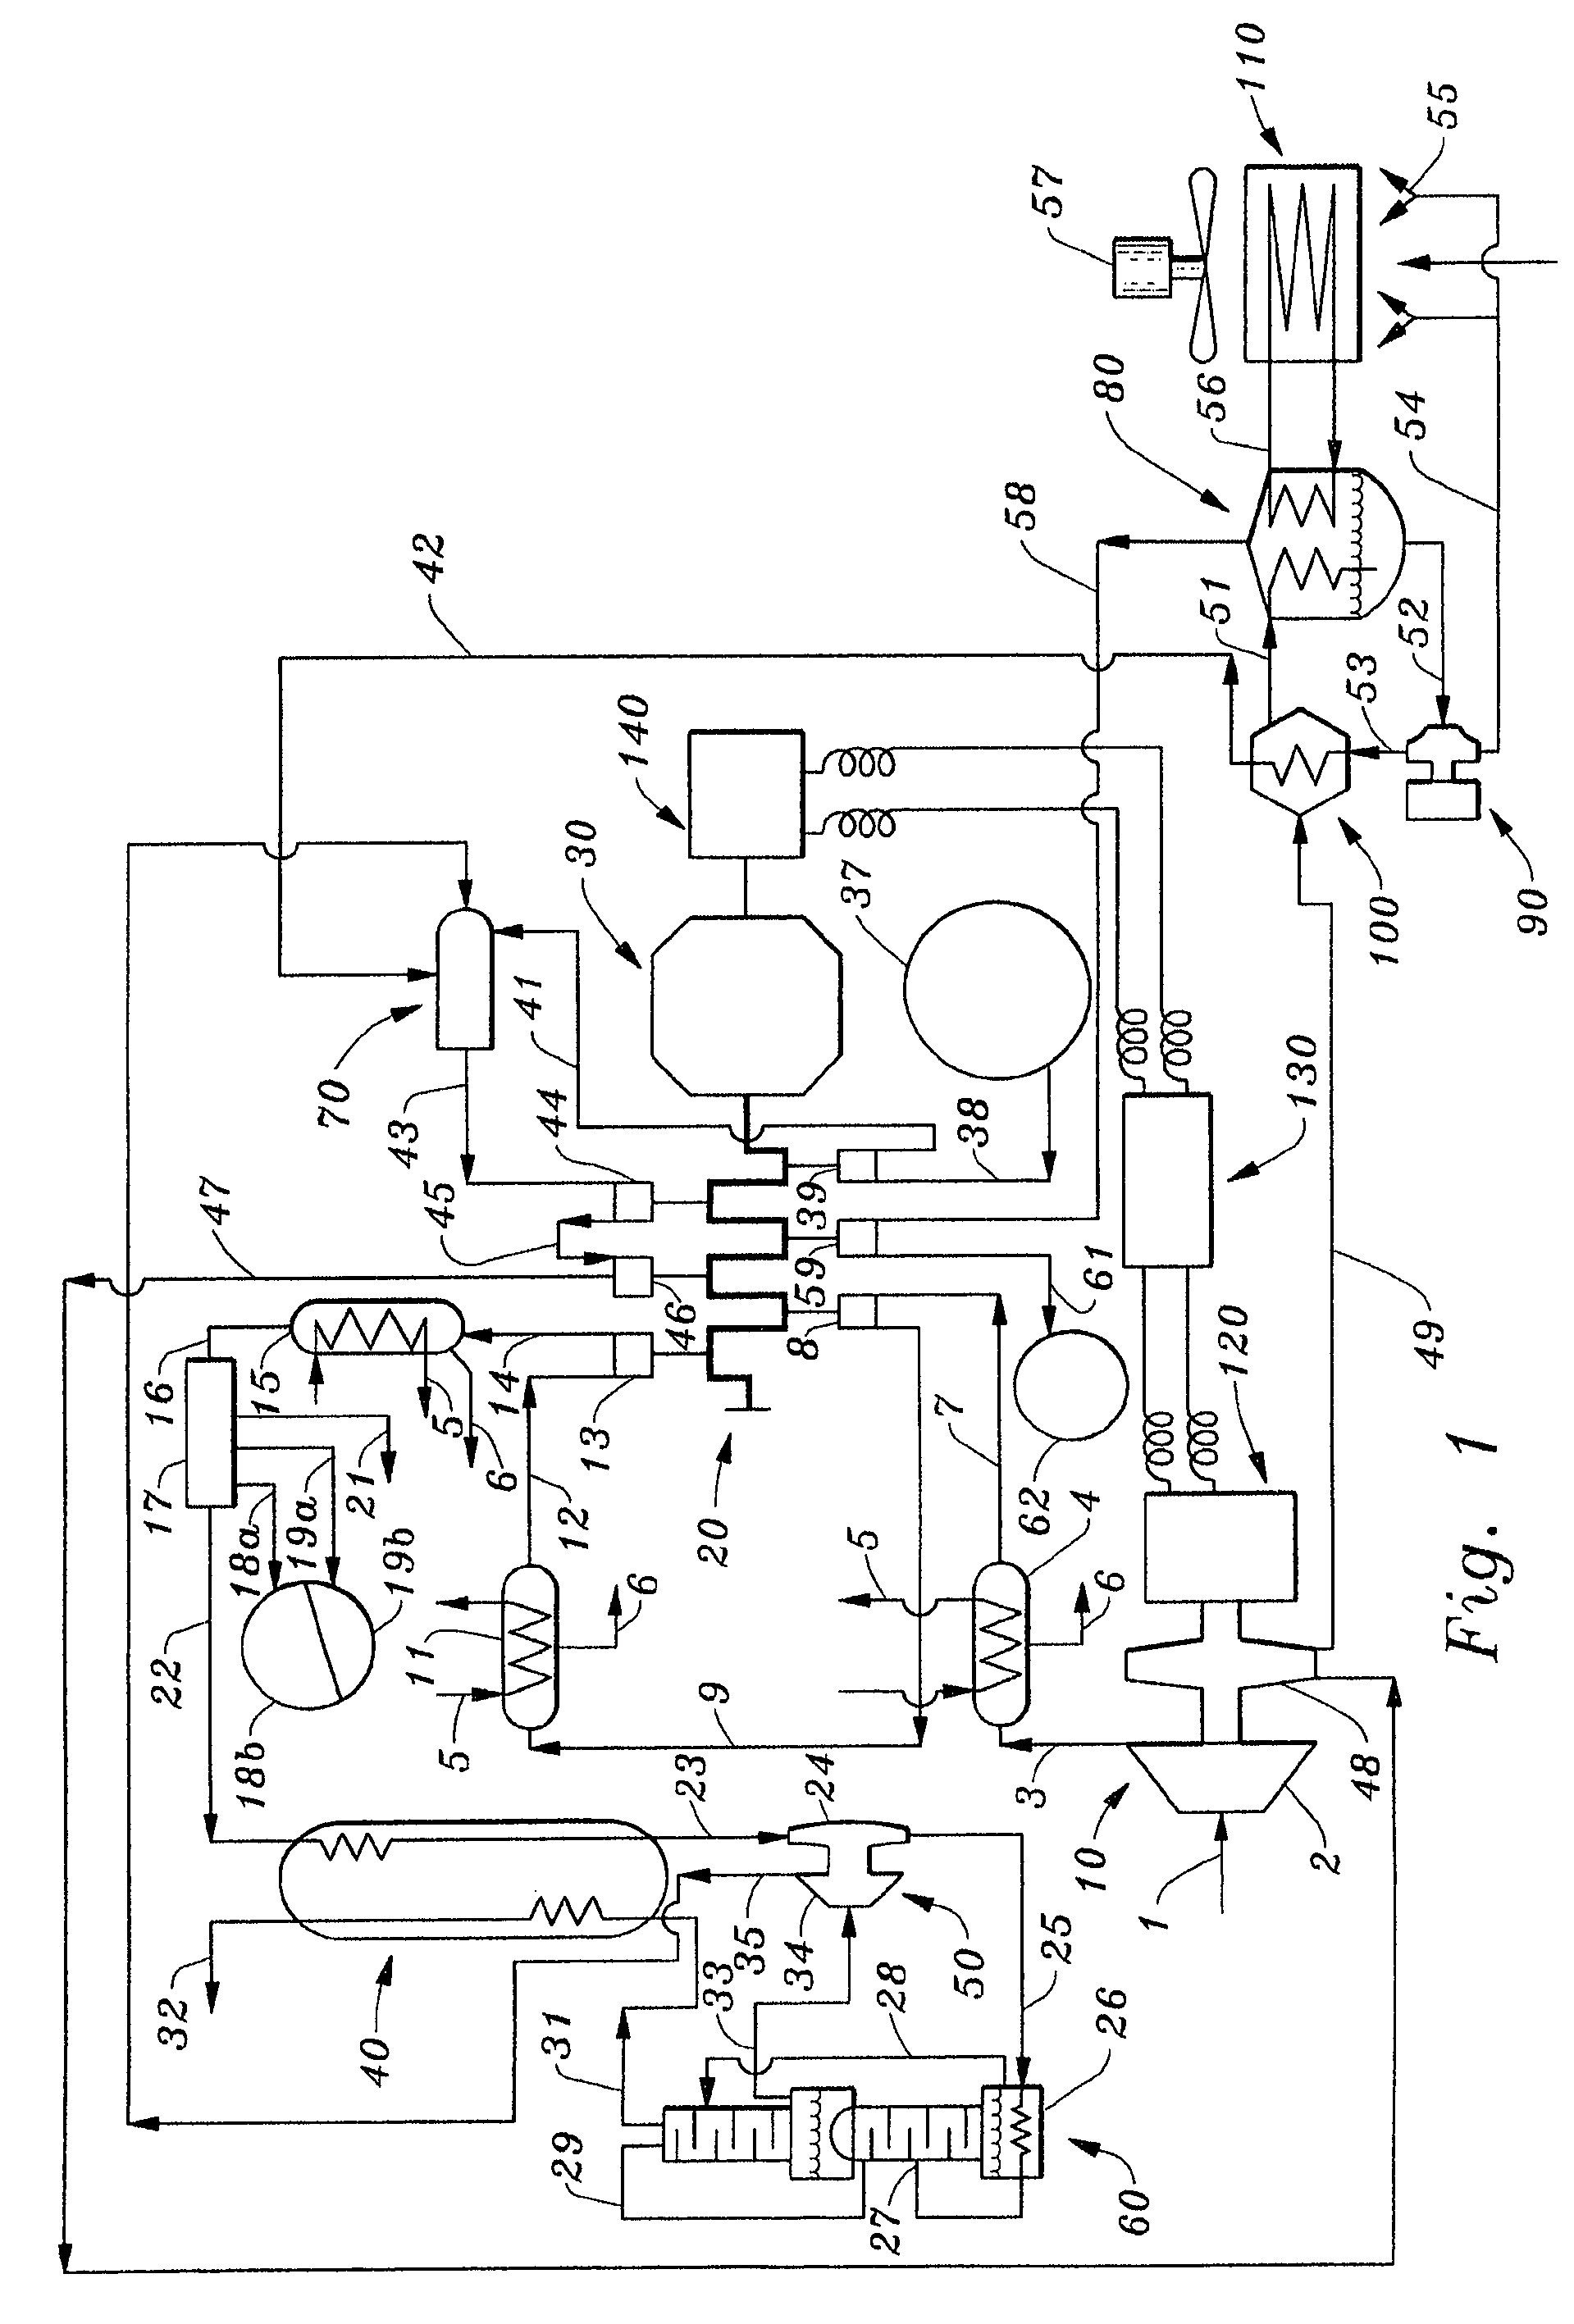 Hydrocarbon combustion power generation system with CO2 sequestration